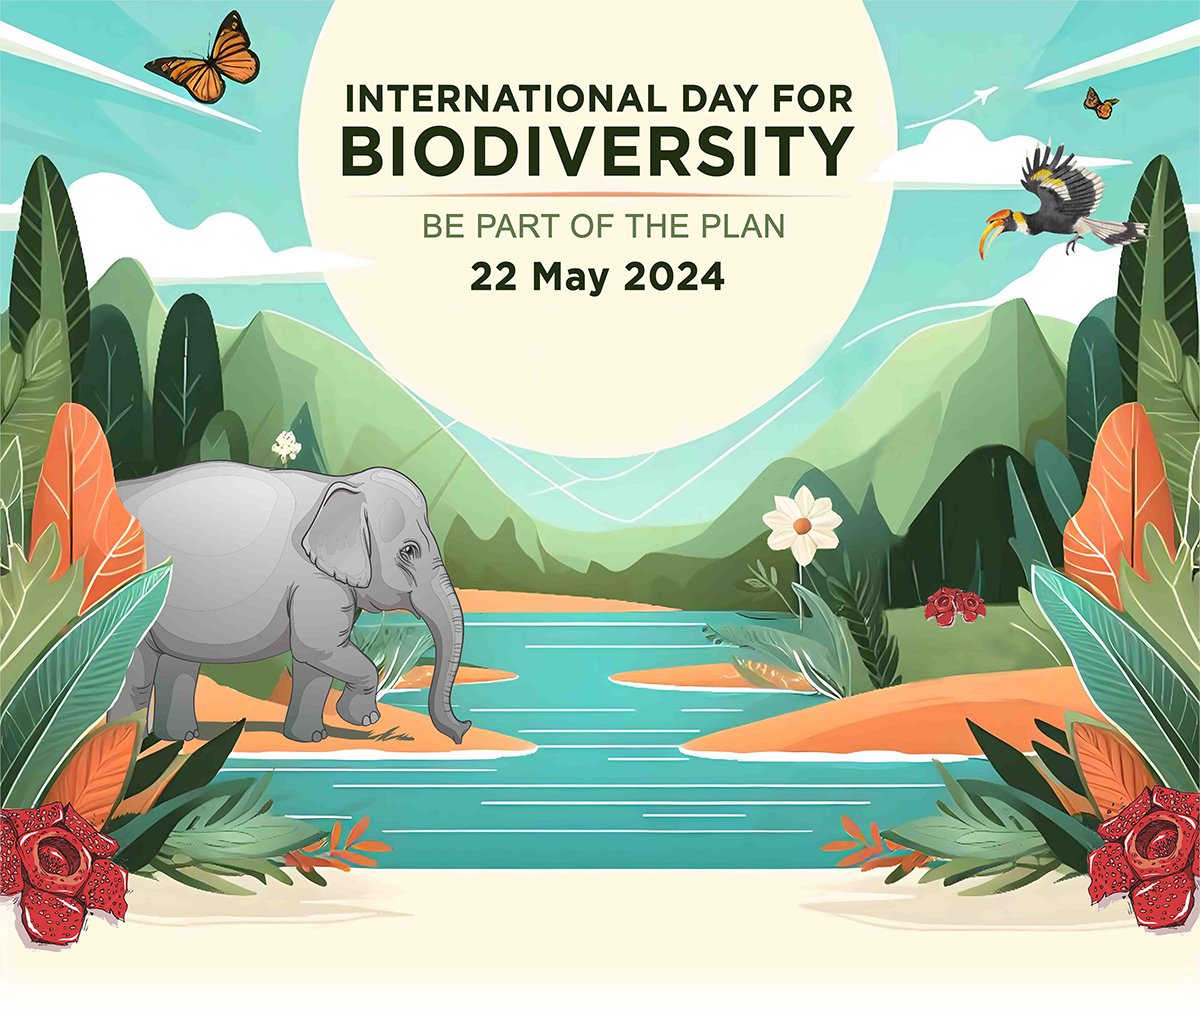 In celebration of #BiodiversityDay, the @ASEAN Member States and @ABiodiversity organise various capacity building and awareness raising events to promote biodiversity appreciation and conservation in the region. Learn more: cbd.int/biodiversity-d…